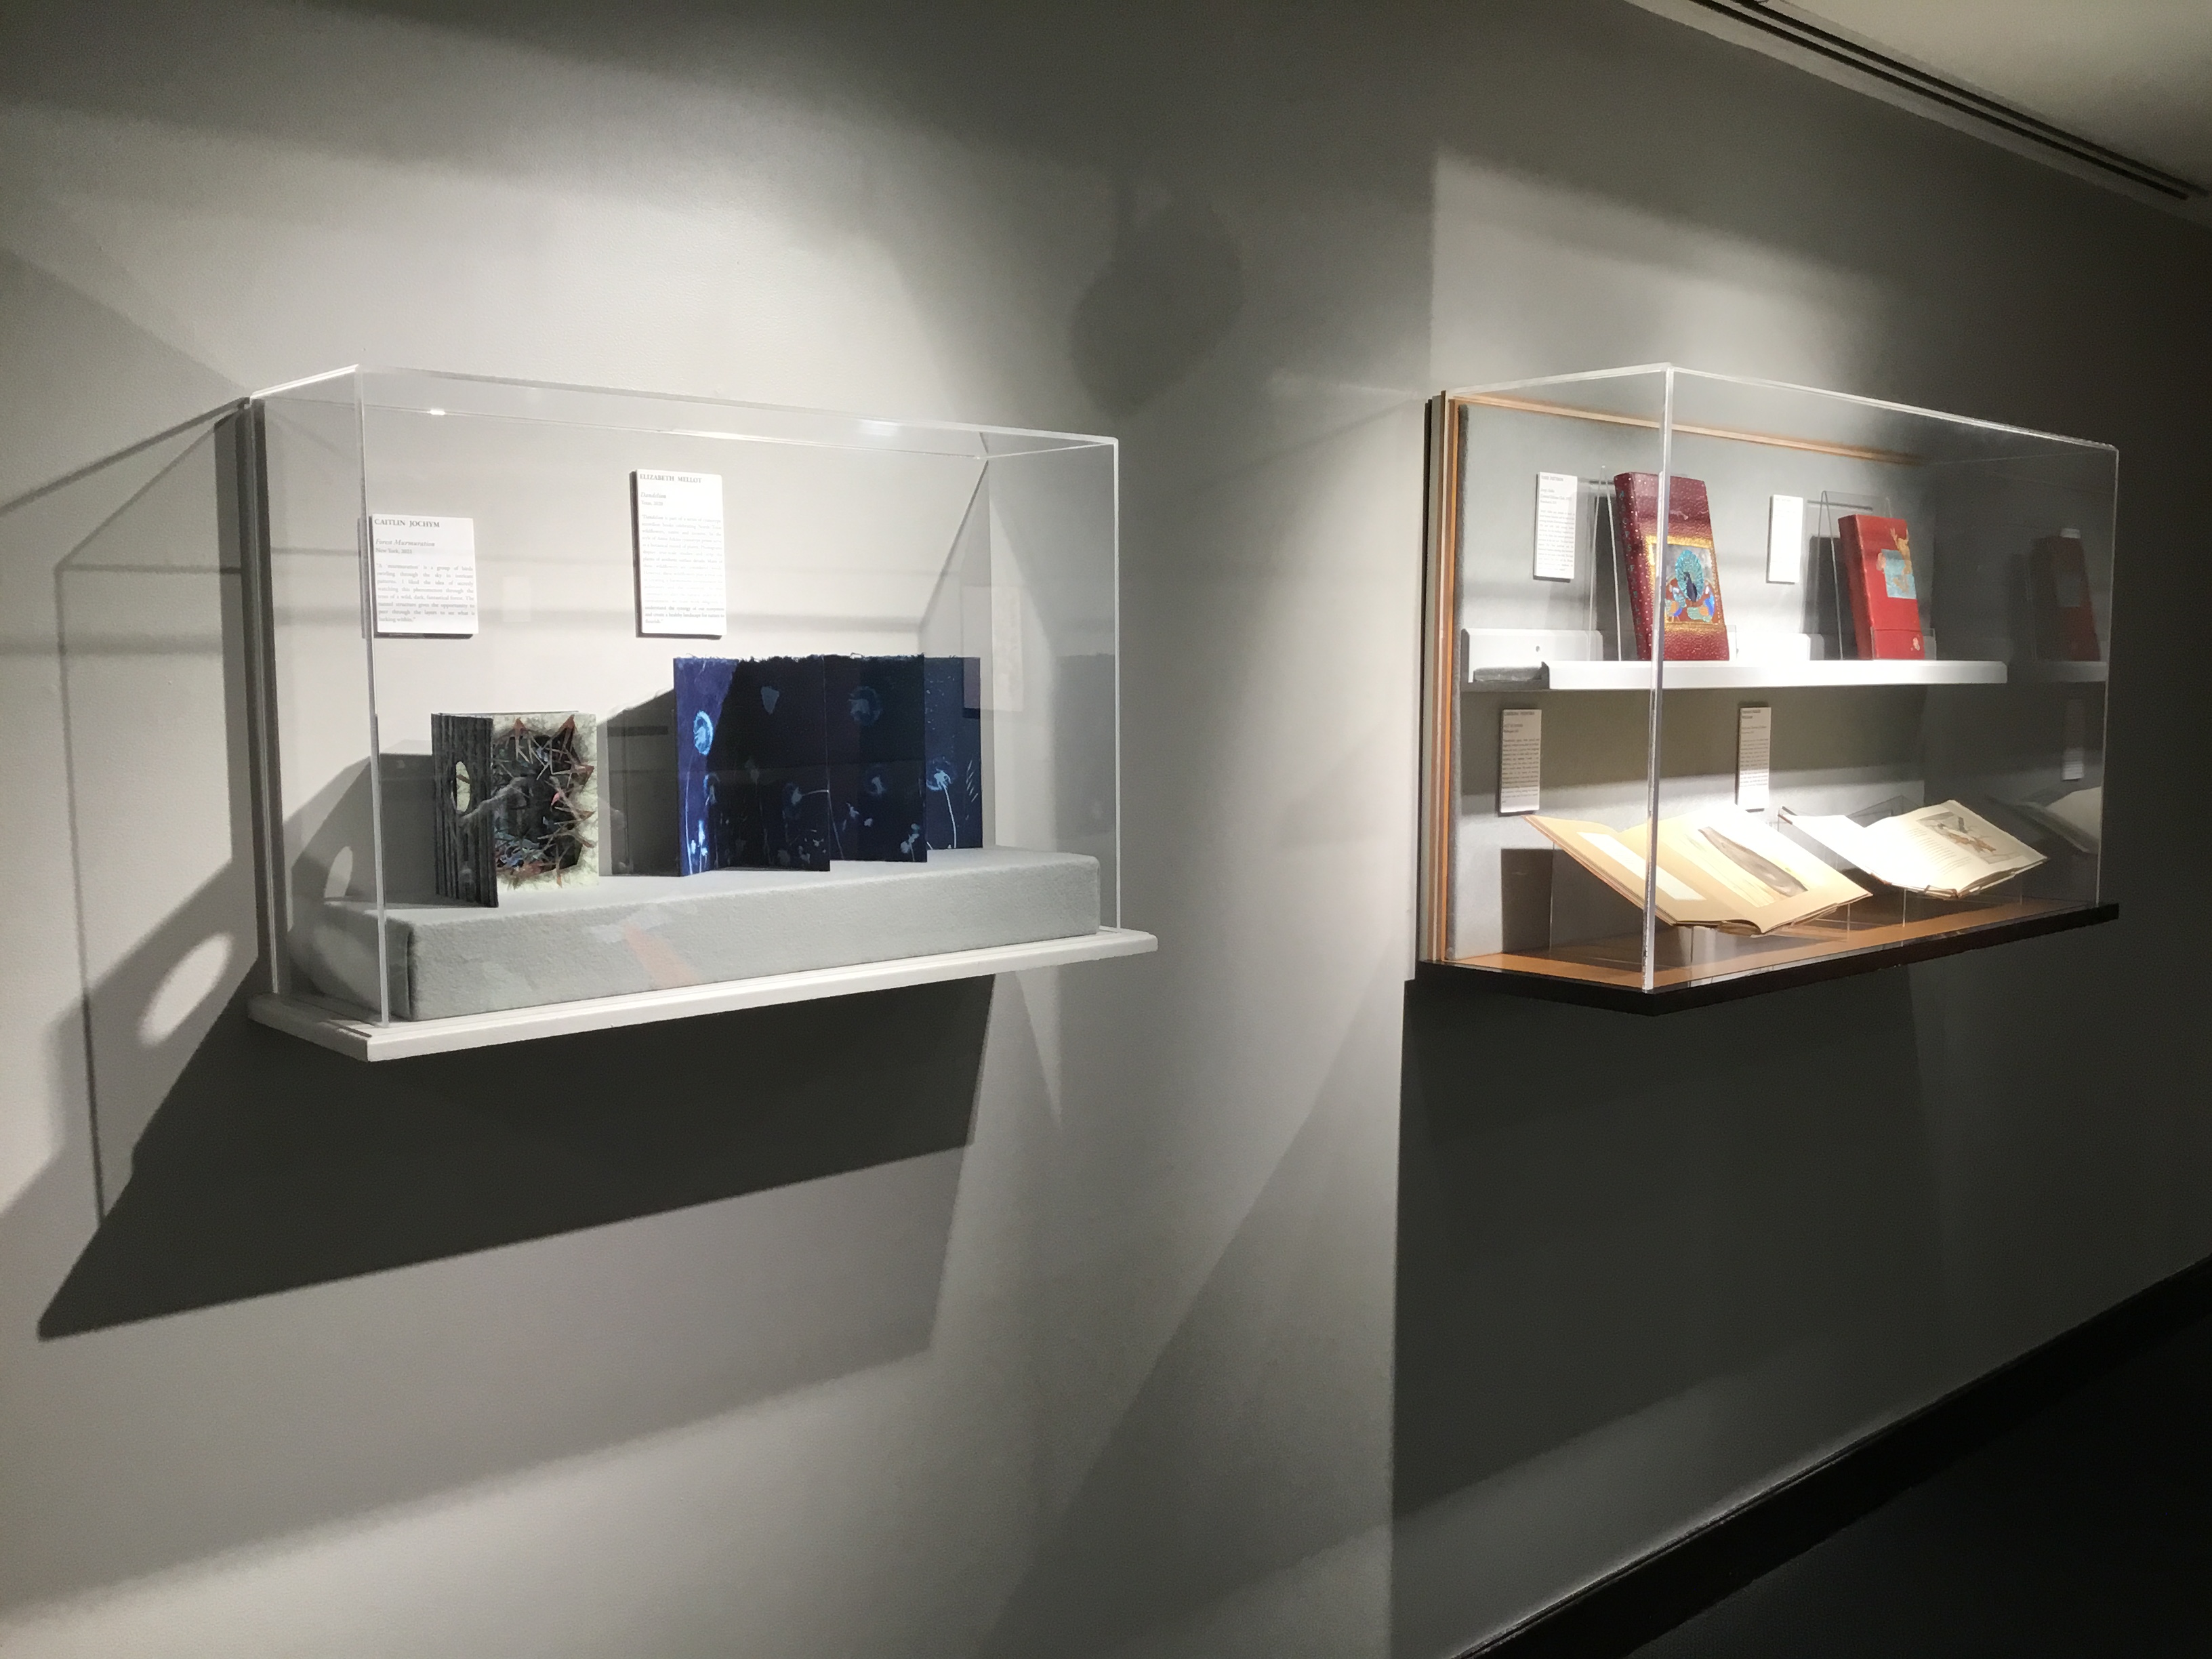 Two plexiglass wall cases in the small gallery.  The case on the left contains two items; a tunnel book with a forest motif and an accordion book with cyanotypes of dandelions.  The case on the right contains four books, two above closed to display their ruddy front covers and two below open to designated pages.